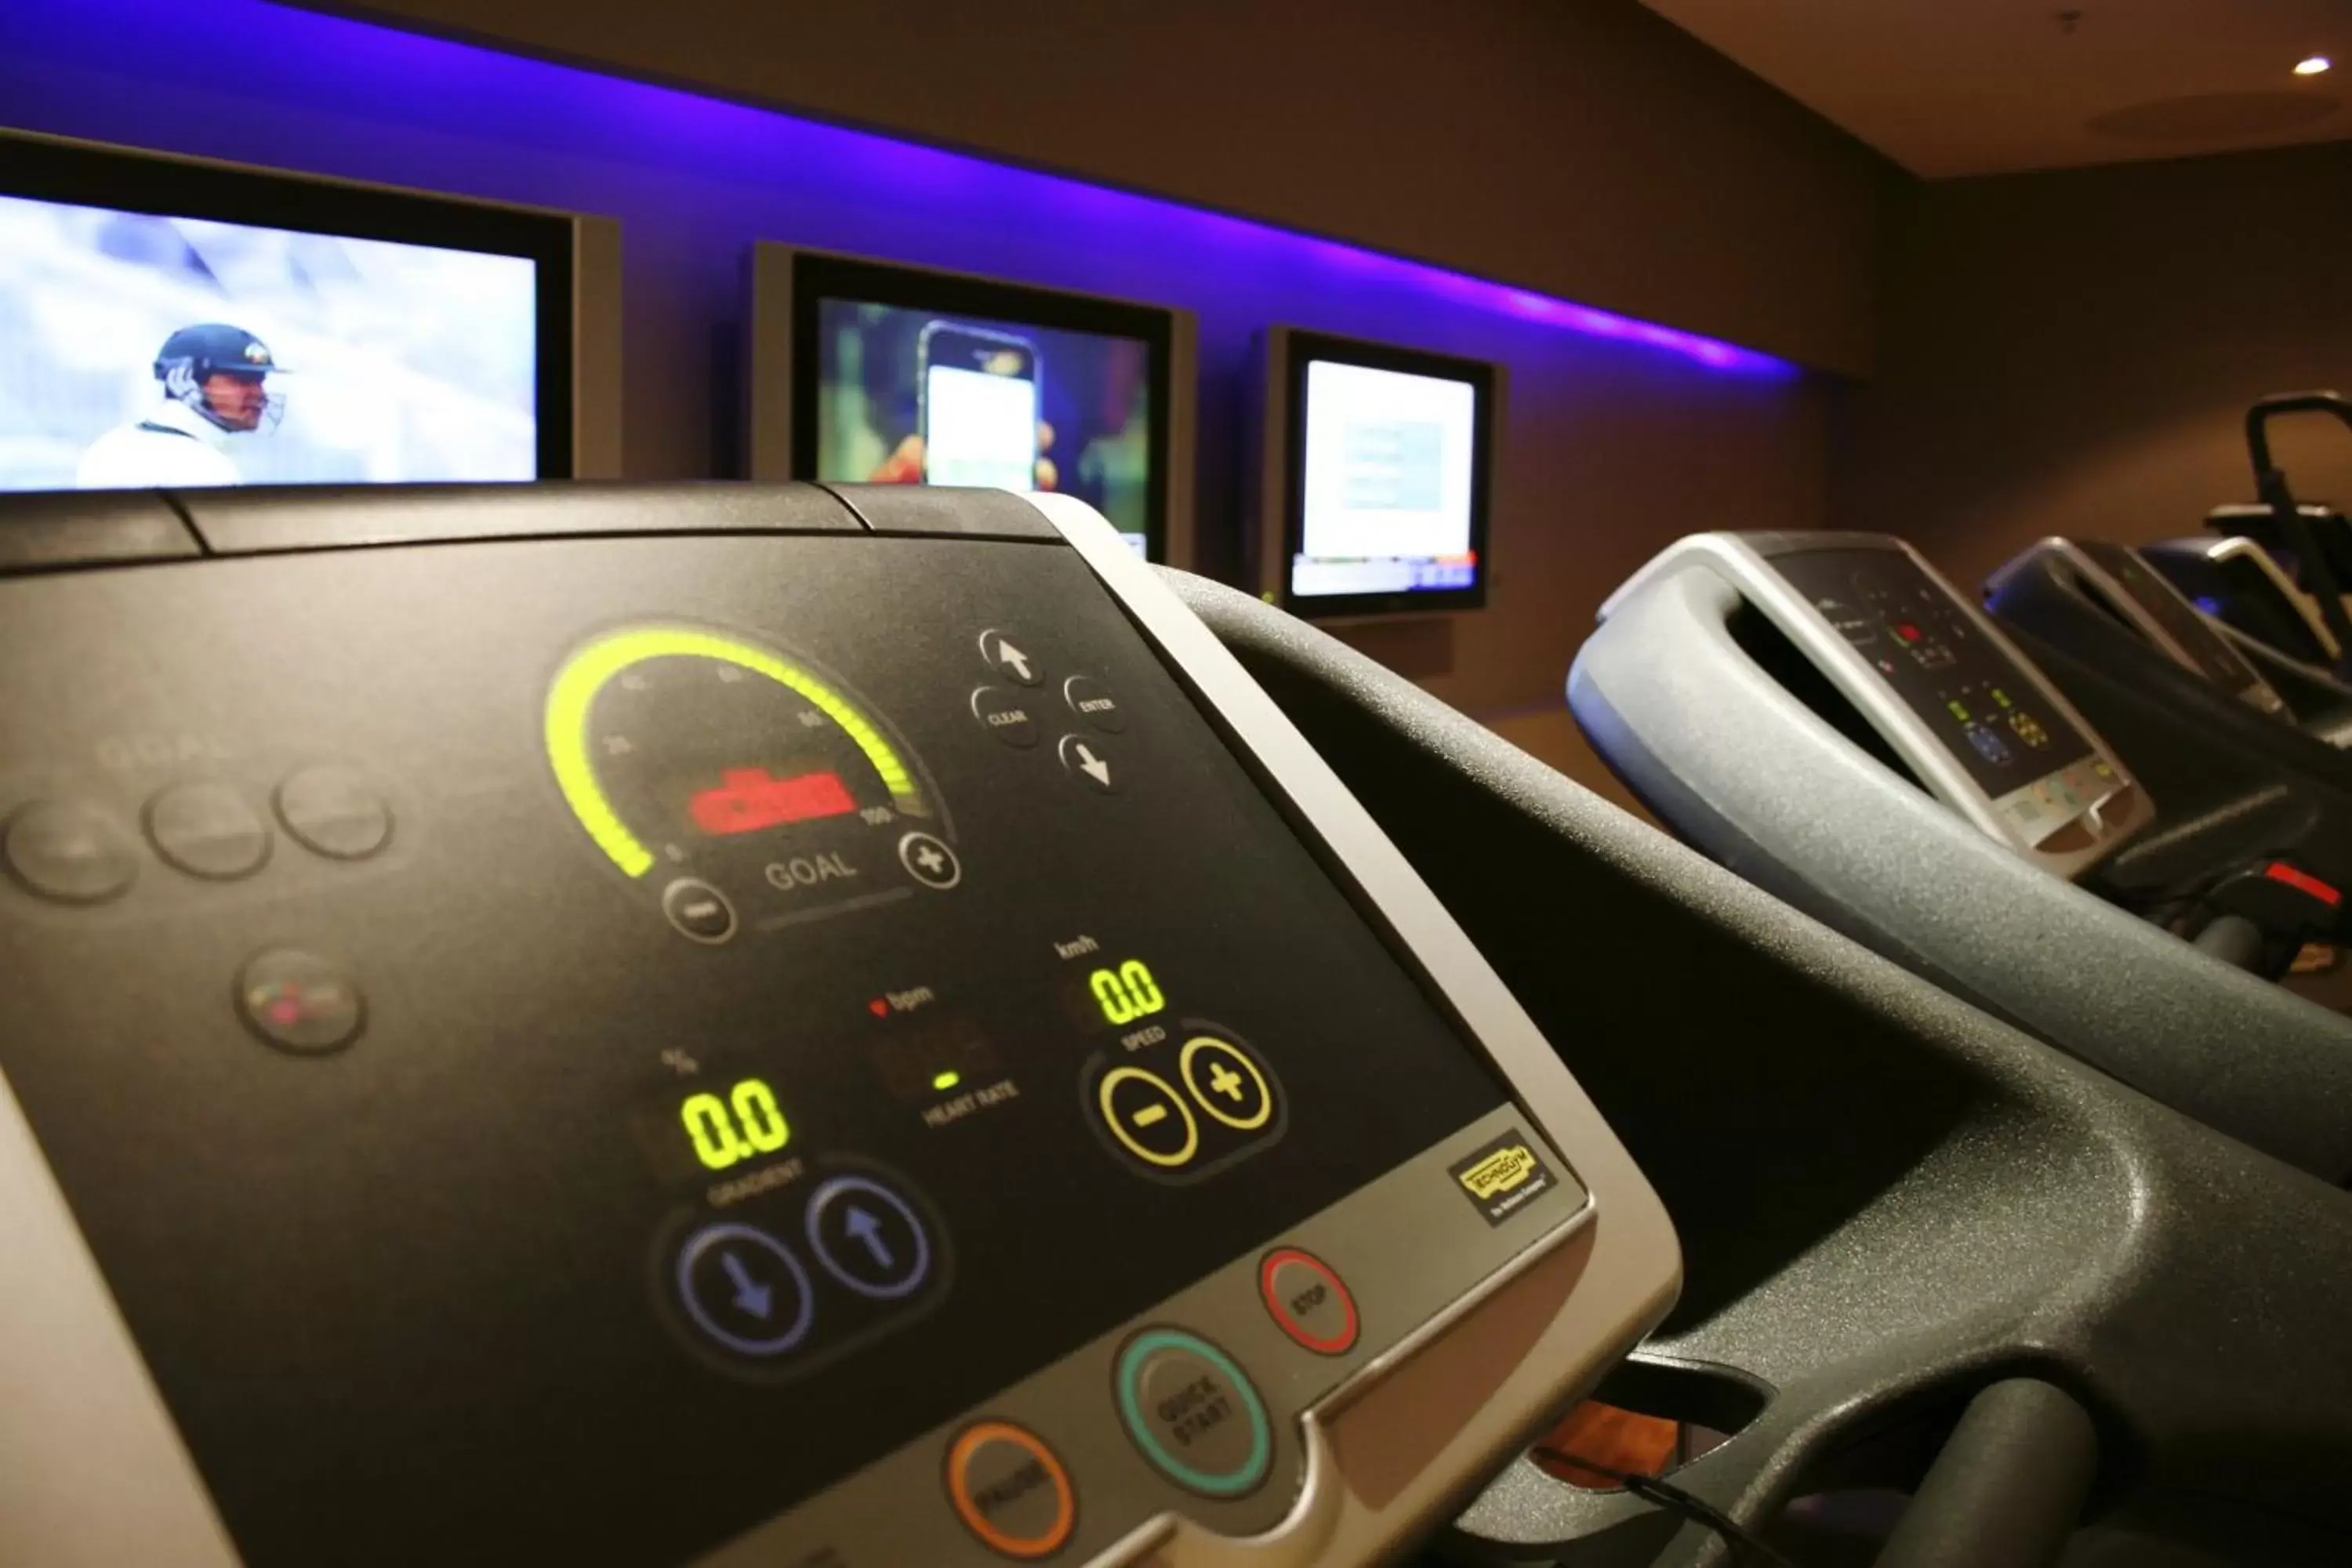 Fitness centre/facilities, Fitness Center/Facilities in Apex City Of London Hotel